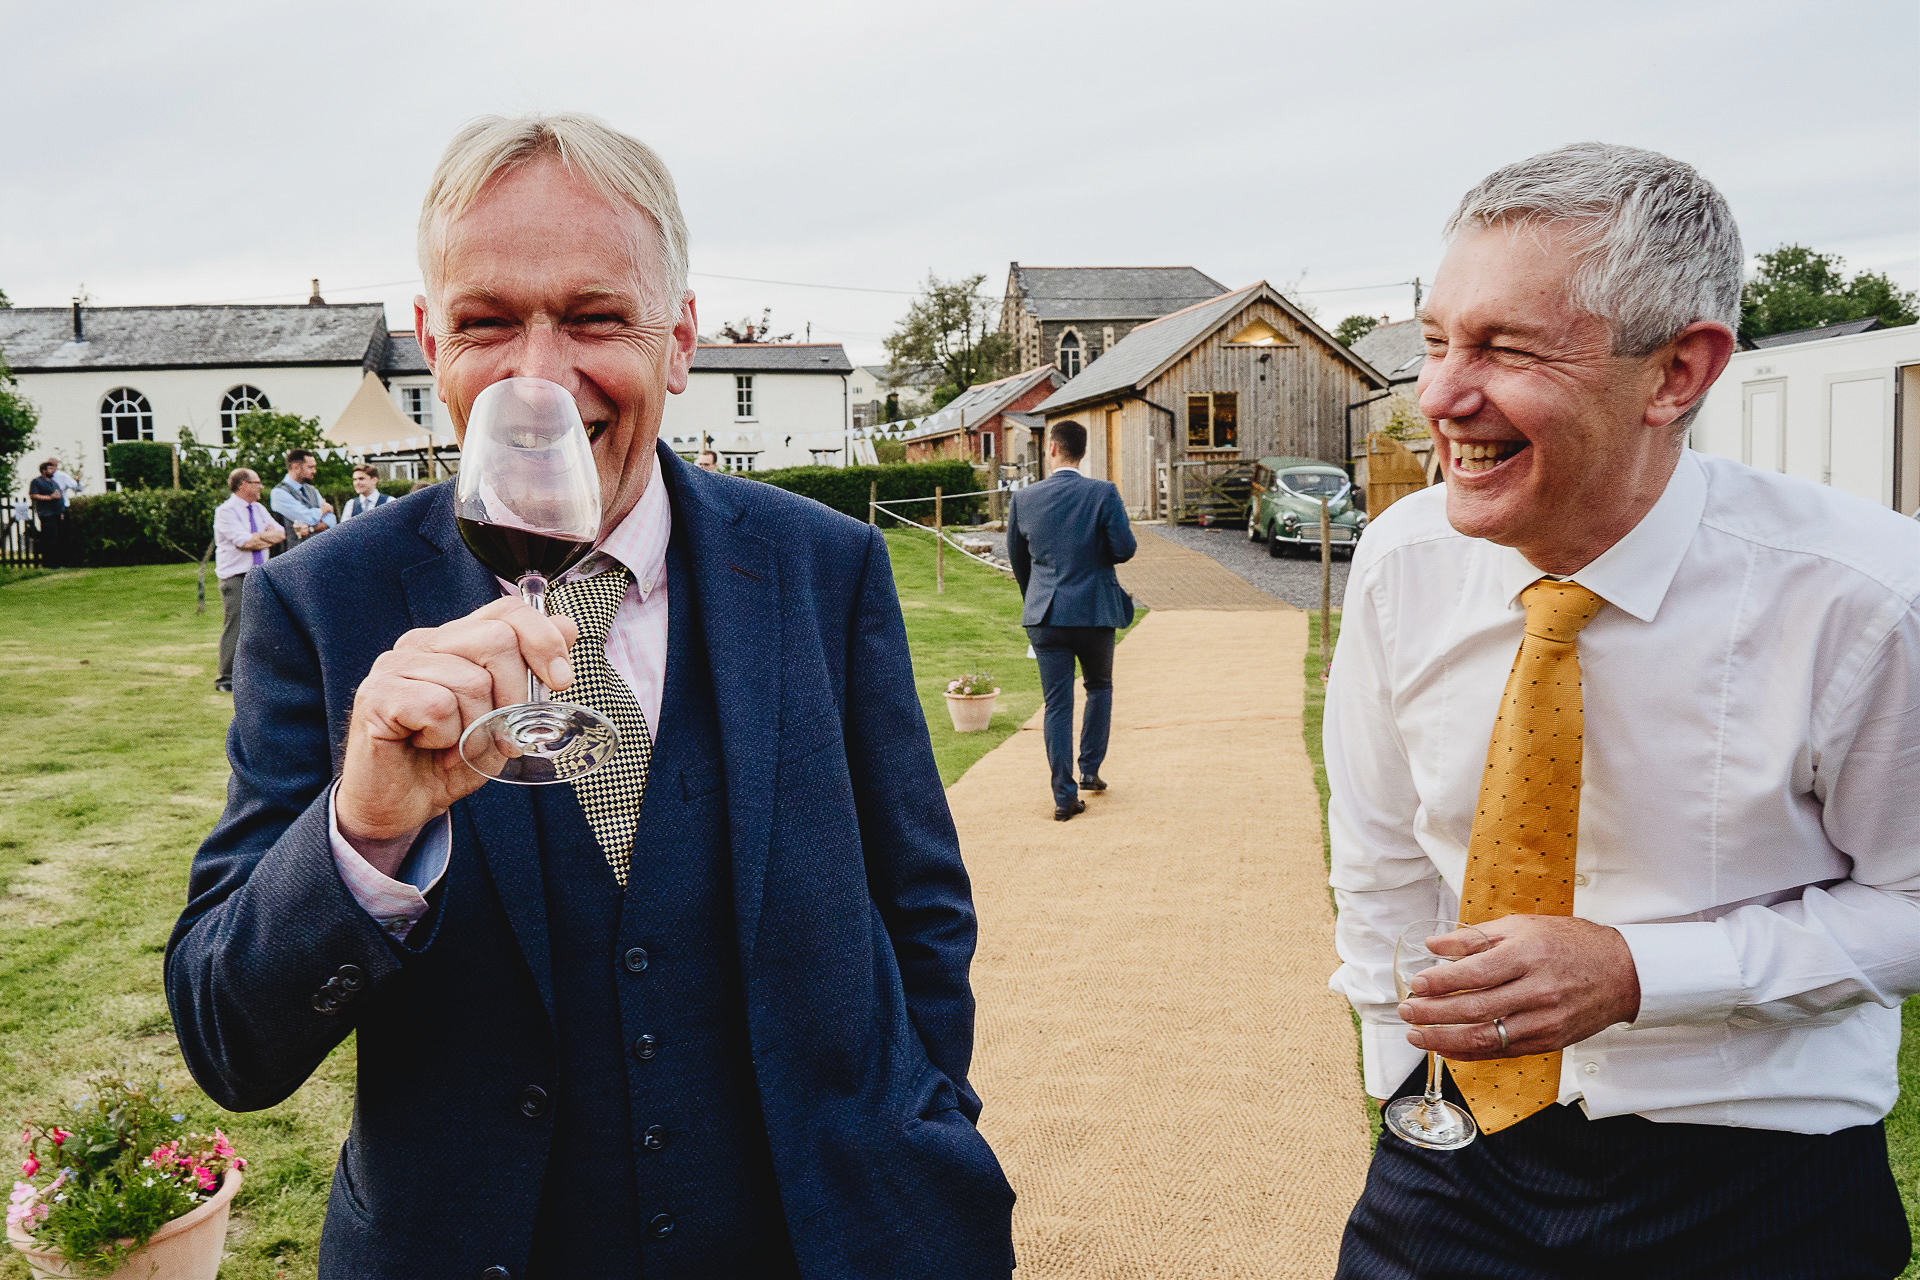 Two men drinking wine and laughing in a field together